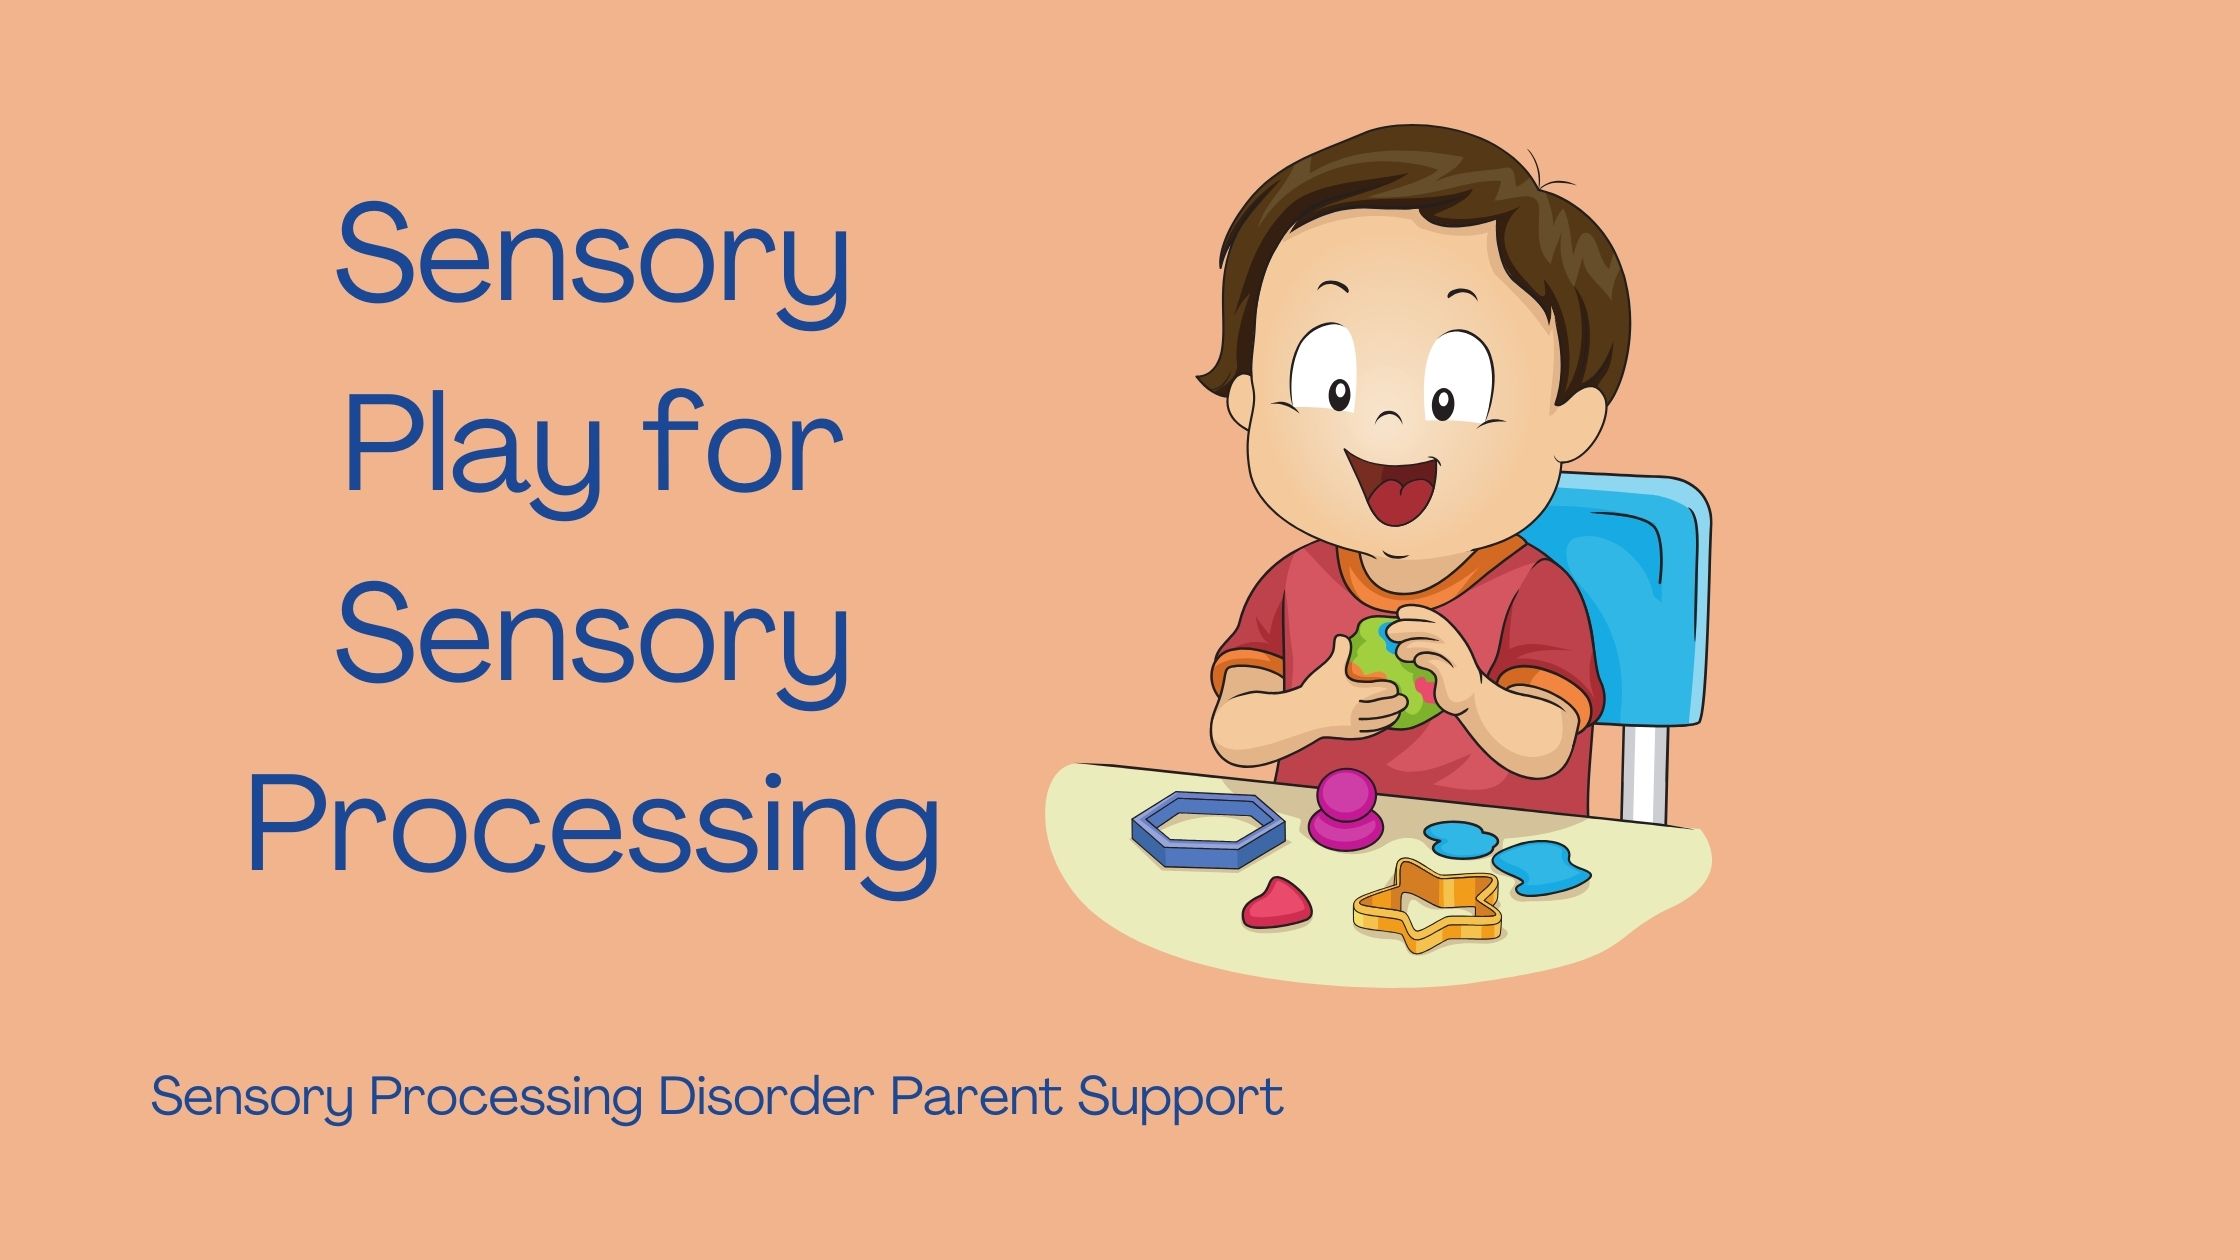 child with sensory processing disorder playing with play dough tactile sensory activity for sensory diet Sensory Play for Sensory Processing